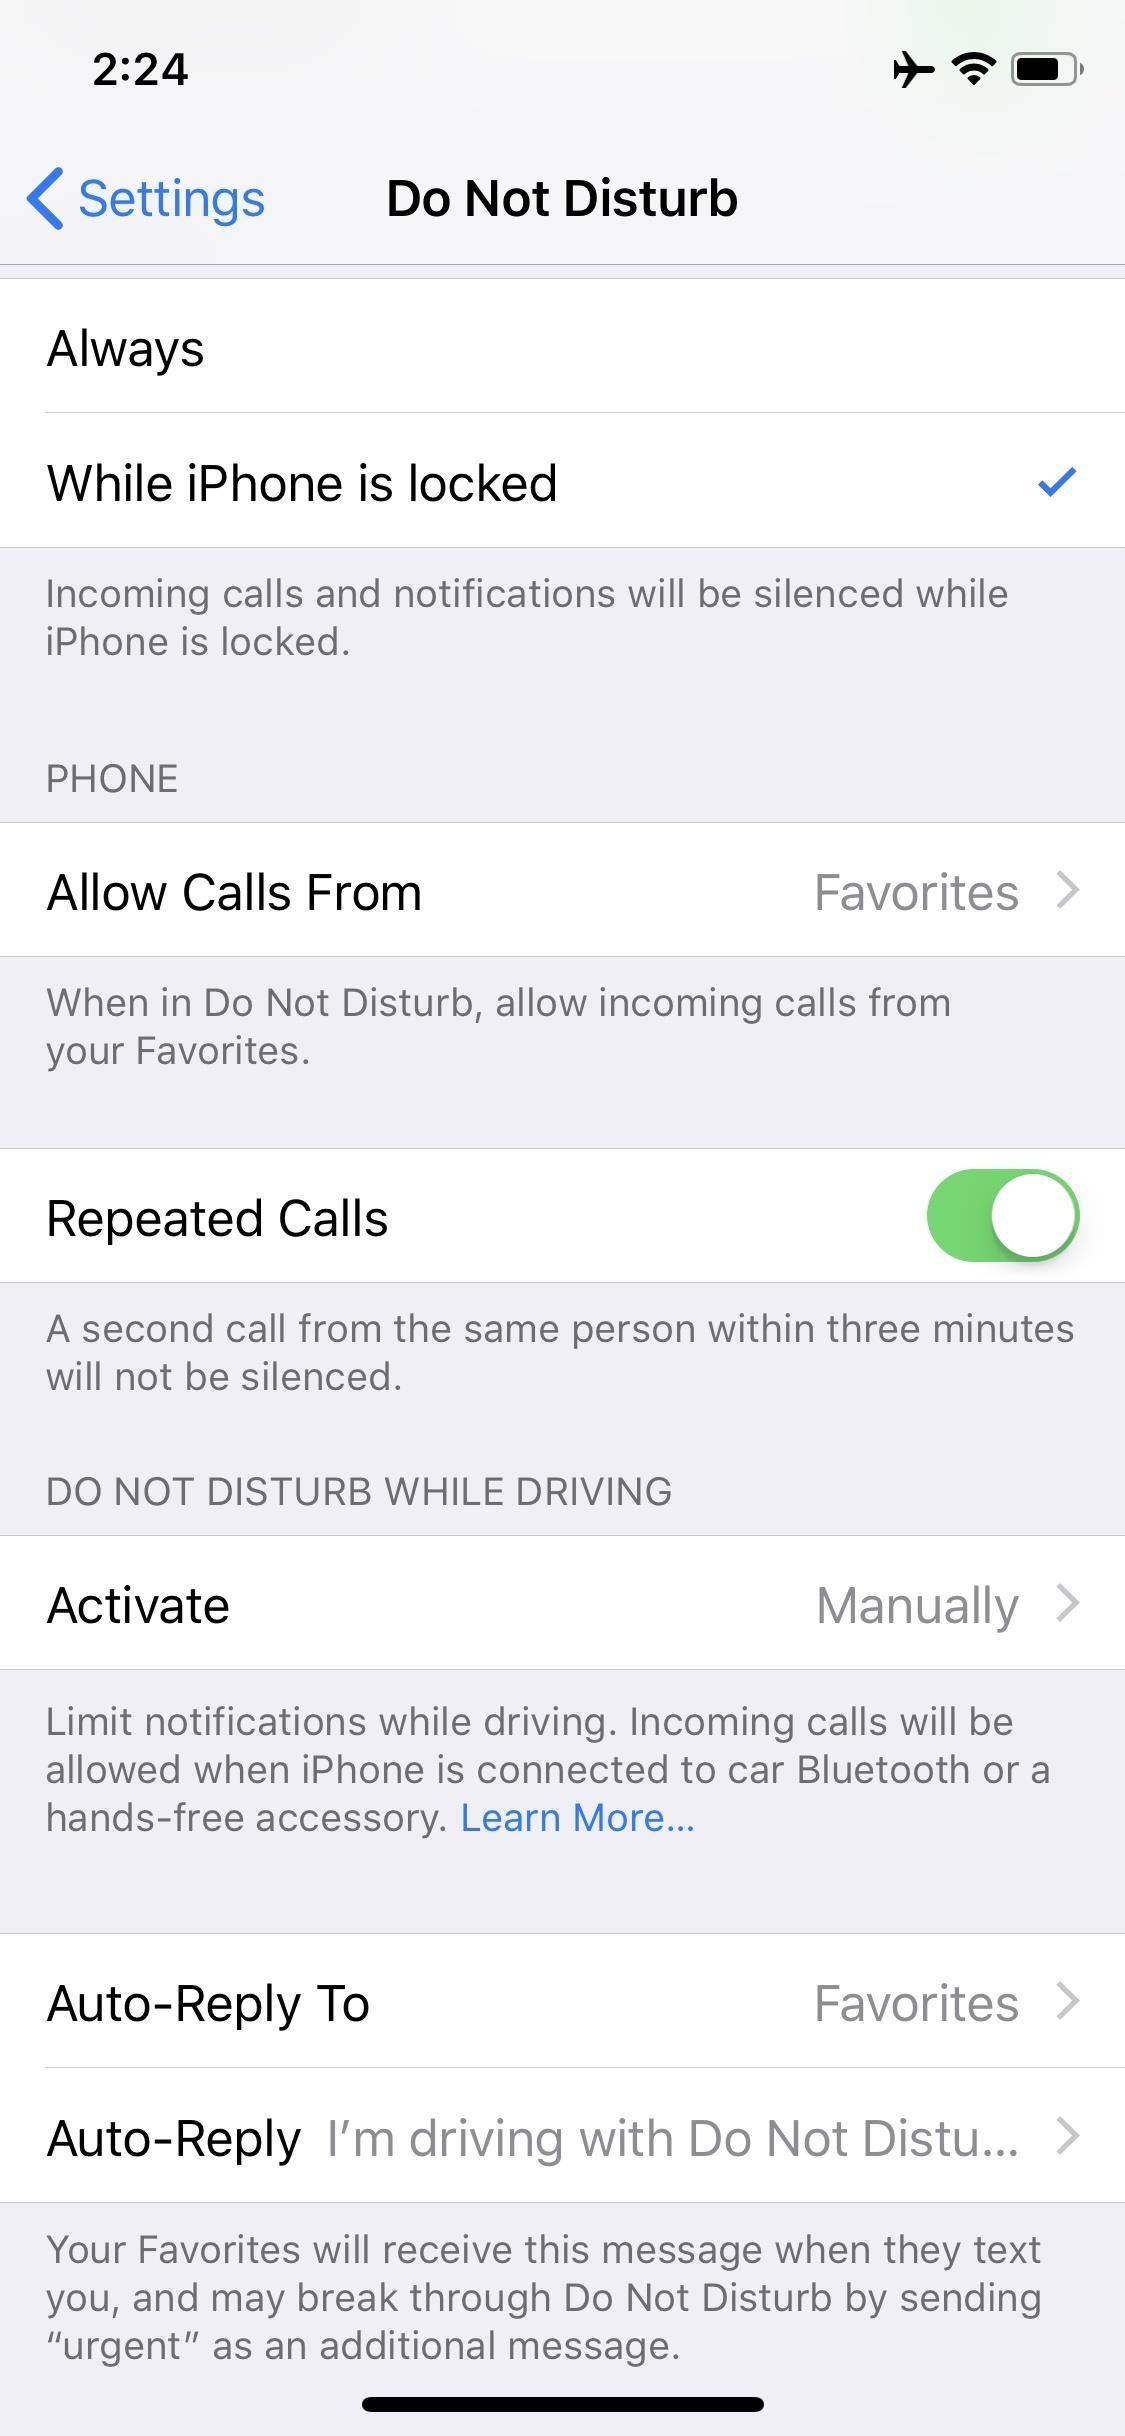 Bedtime Mode: How to Keep Notifications from Distracting You at Night on iOS 12